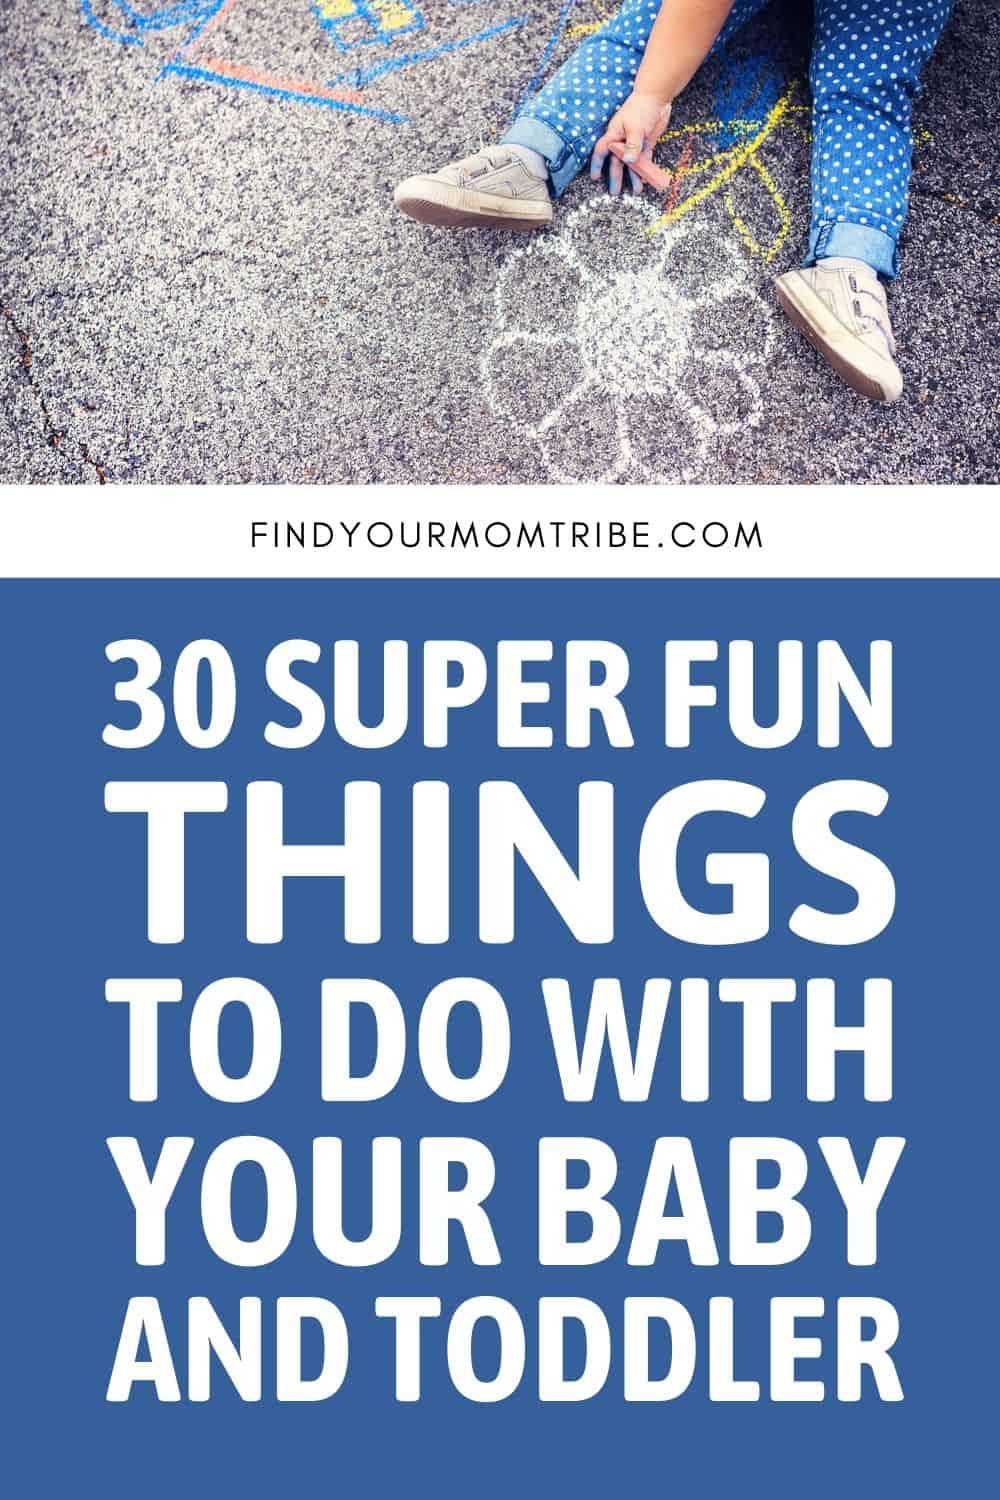 30 Super Fun Things To Do With Your Baby And Toddler